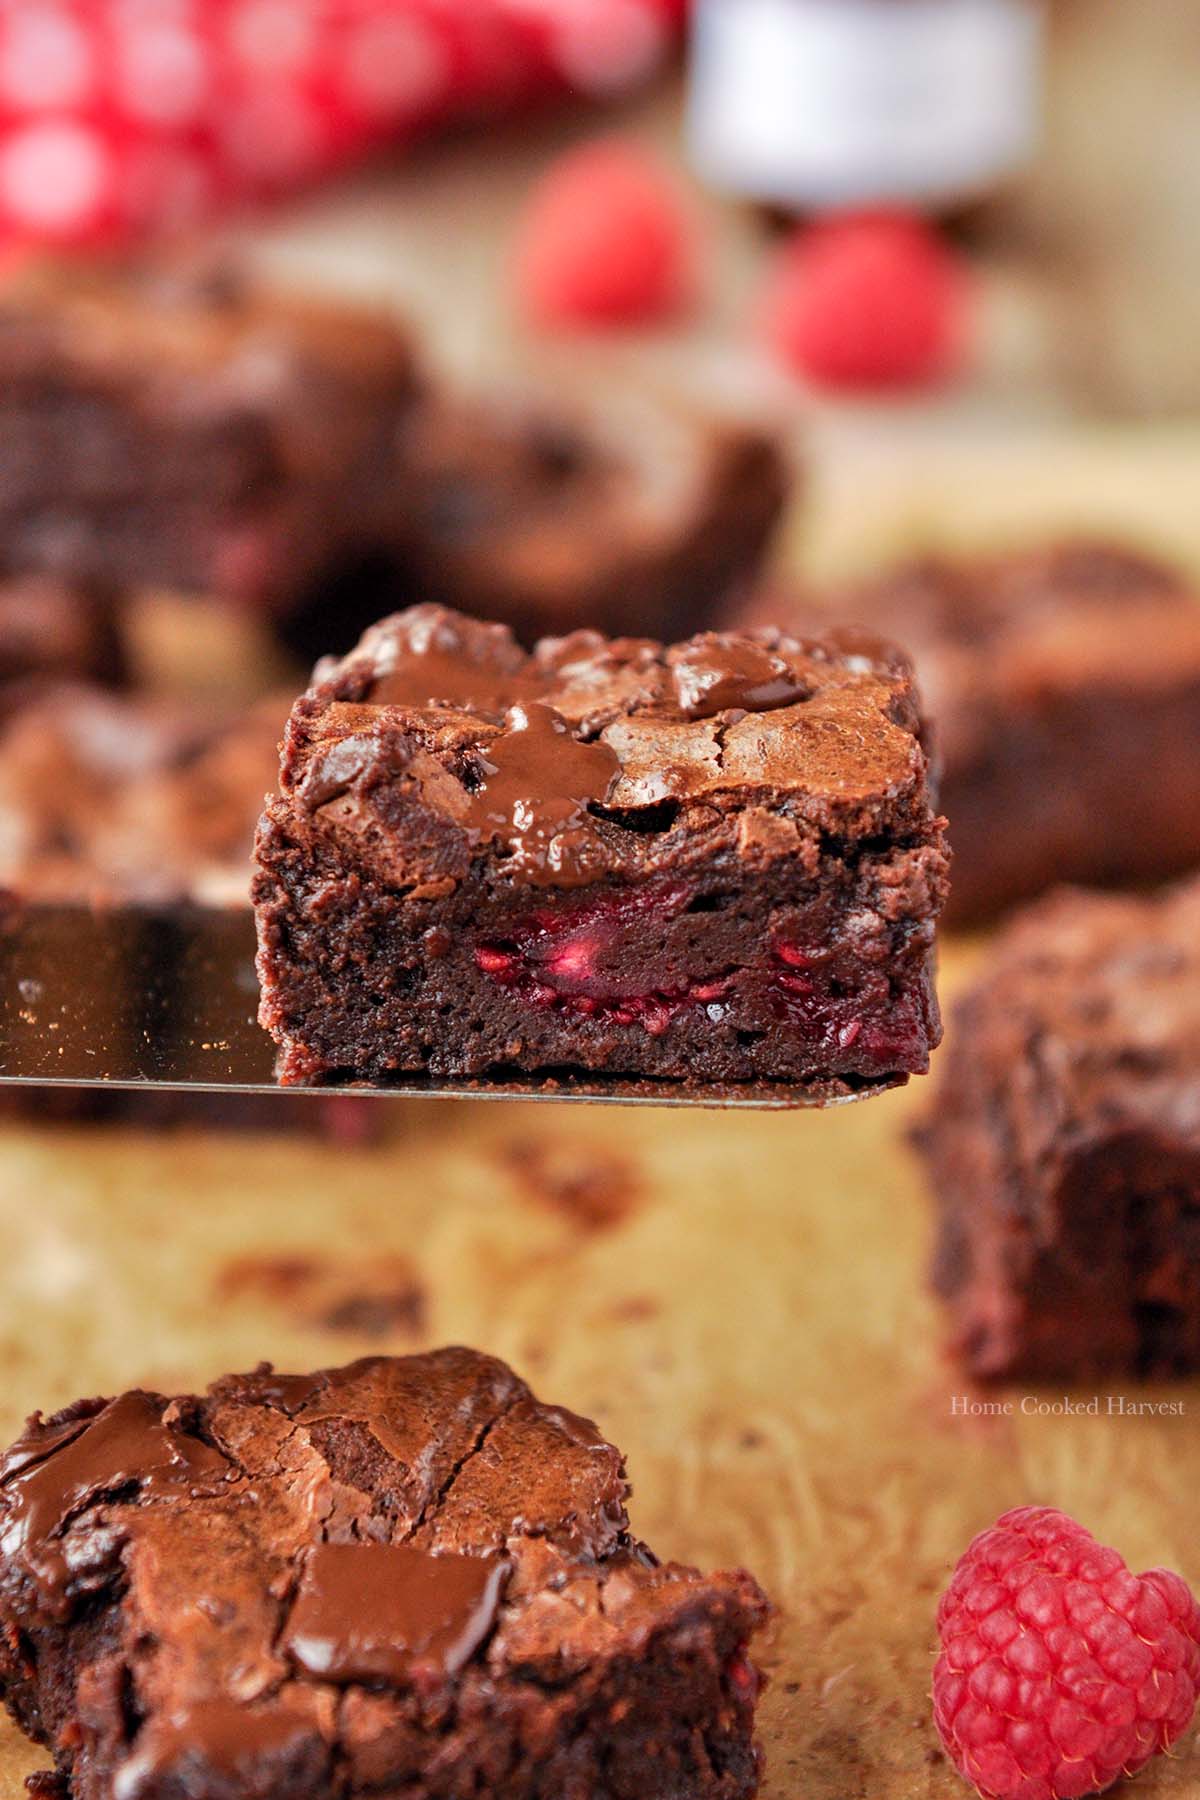 A raspberry brownie on a spatula with more brownies around.